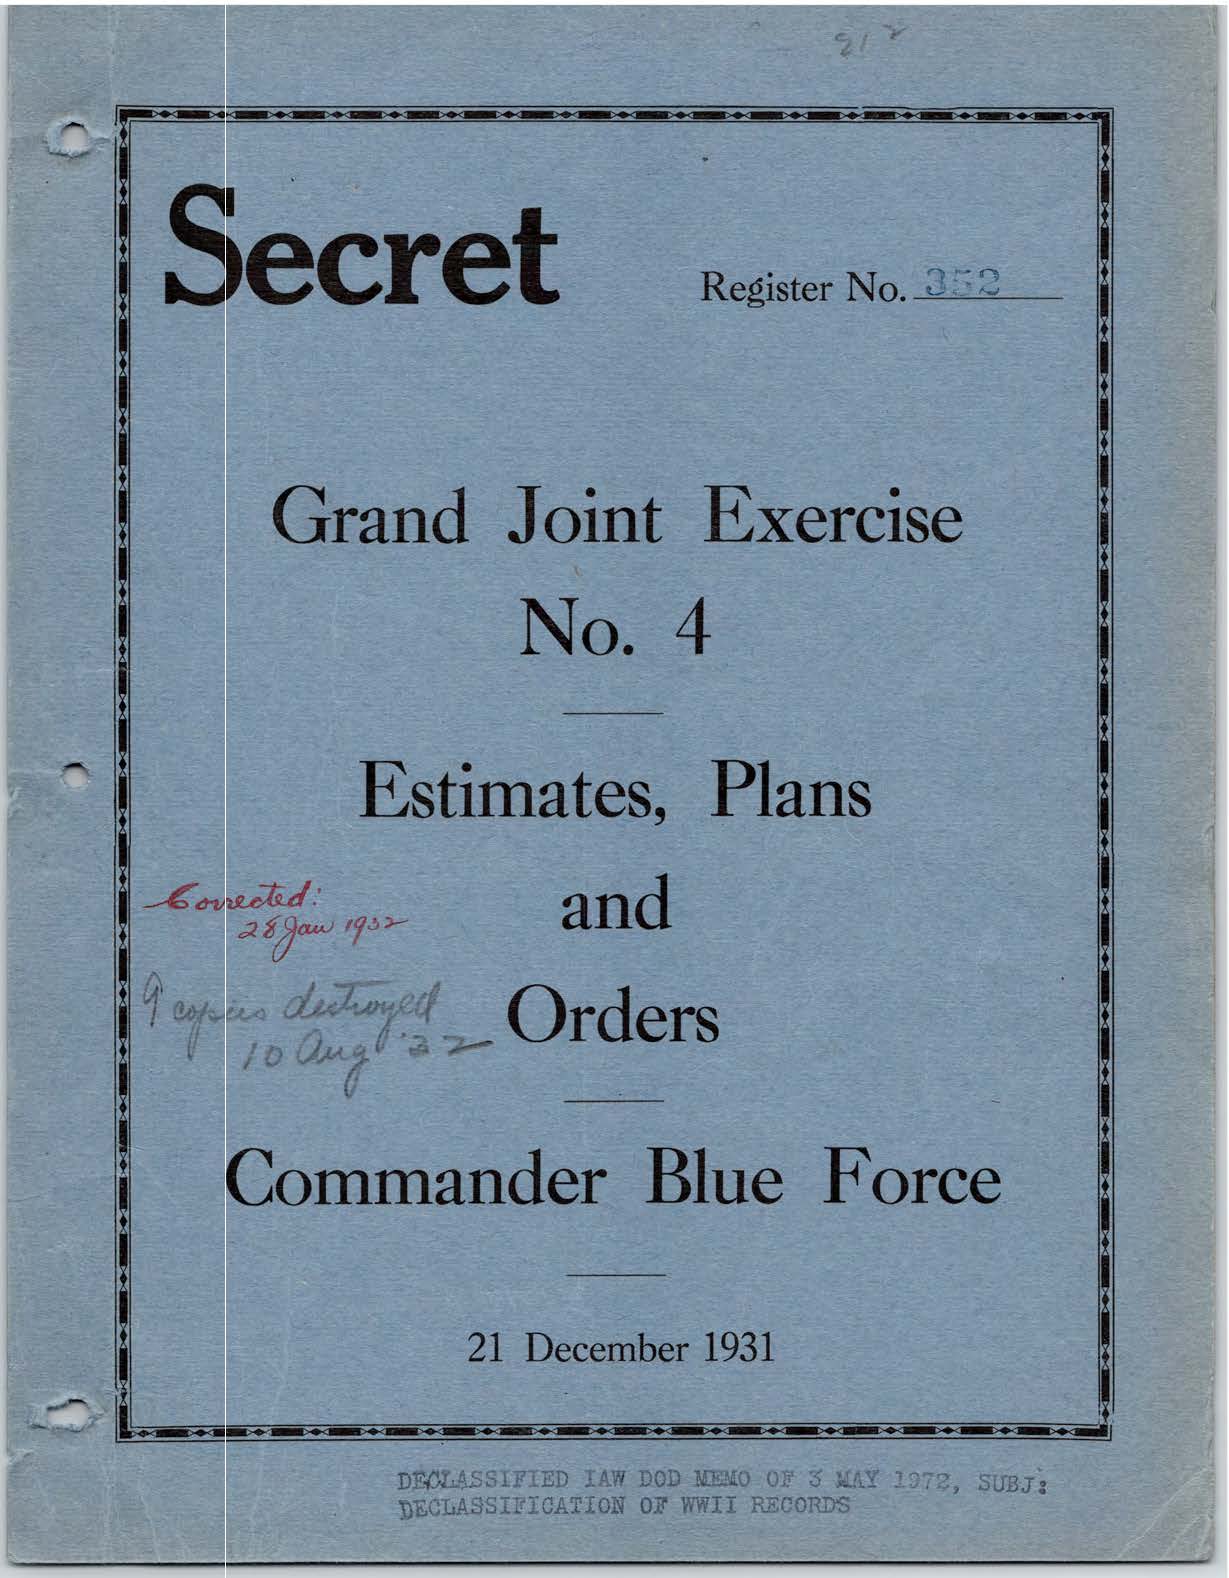 Grand Joint Exercise No. 4 Estimates, Plans and Orders: Commander Blue Force